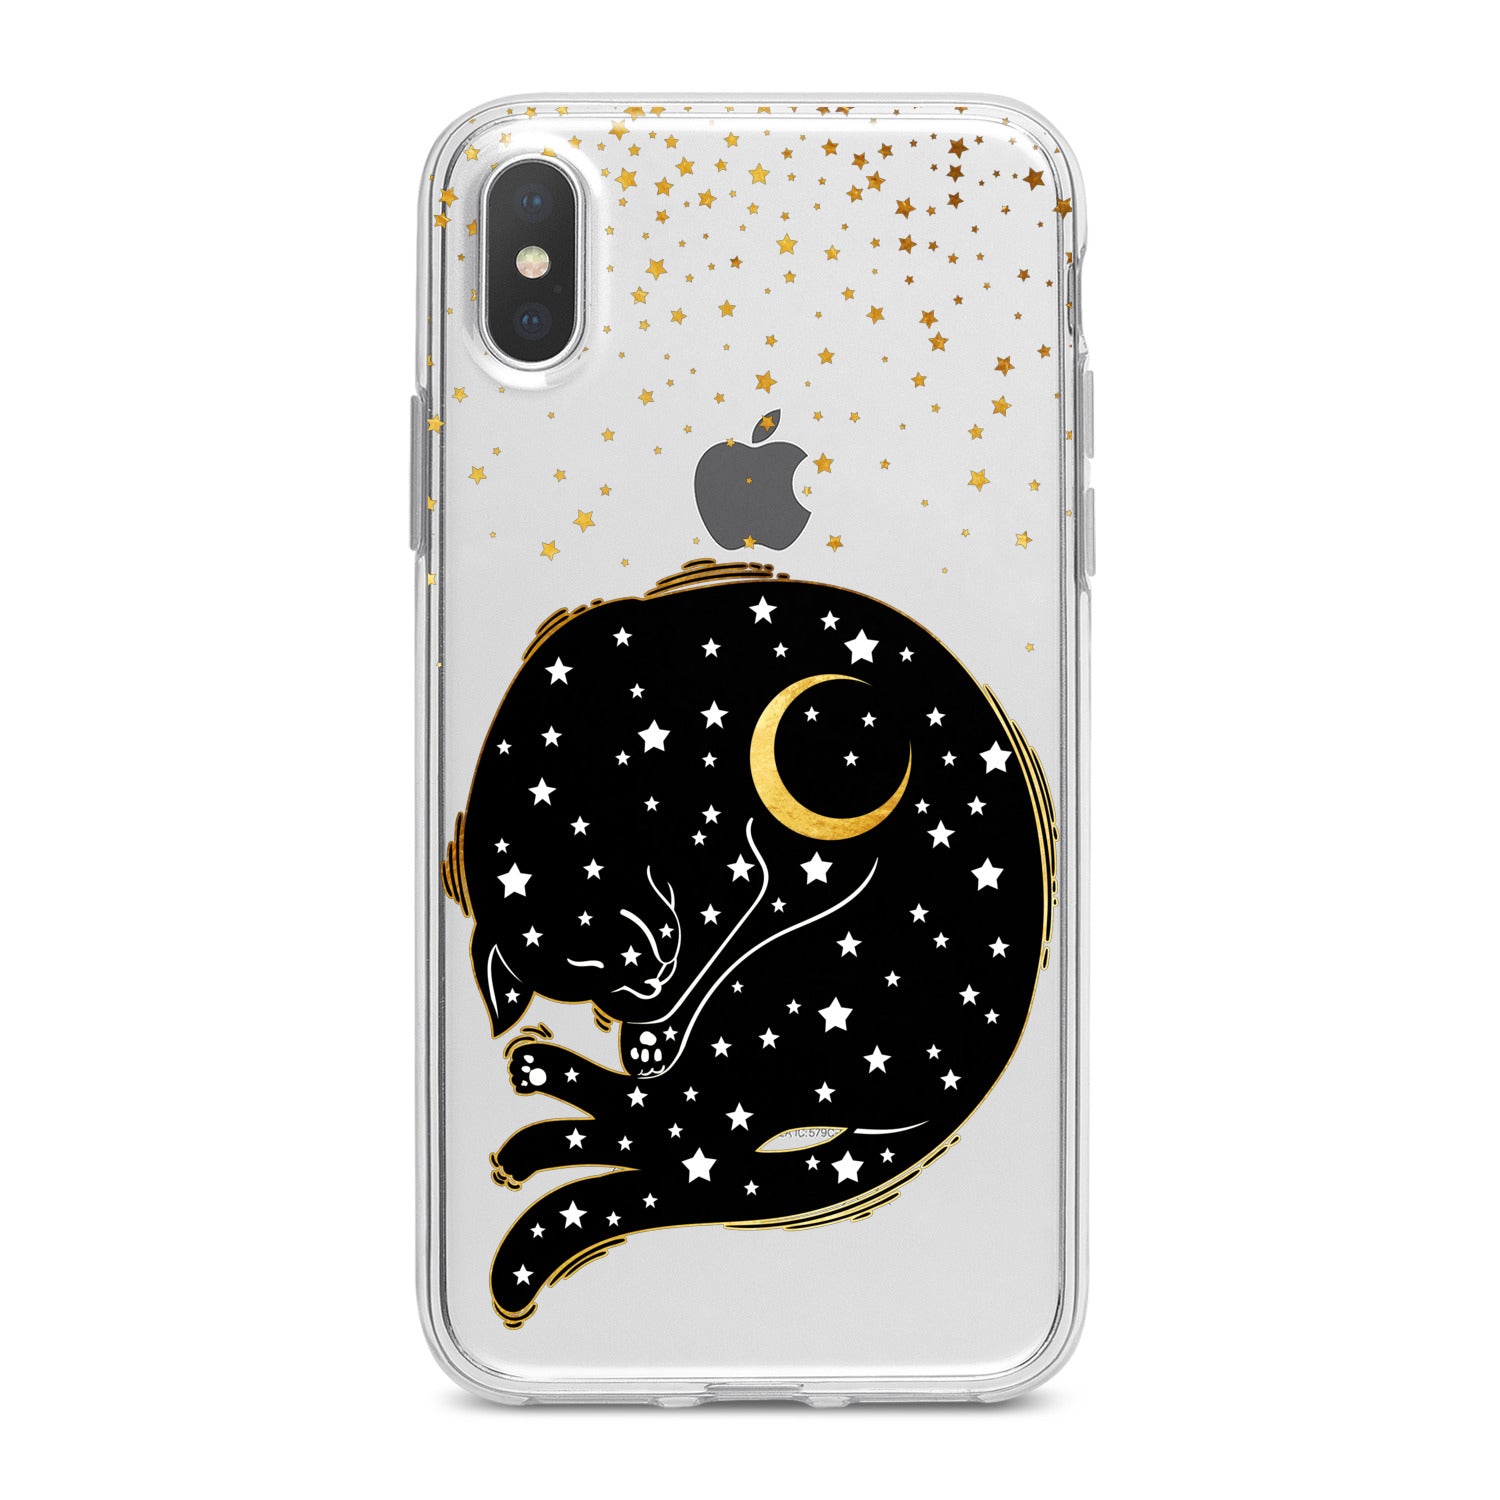 Lex Altern Feline Good Night Phone Case for your iPhone & Android phone.